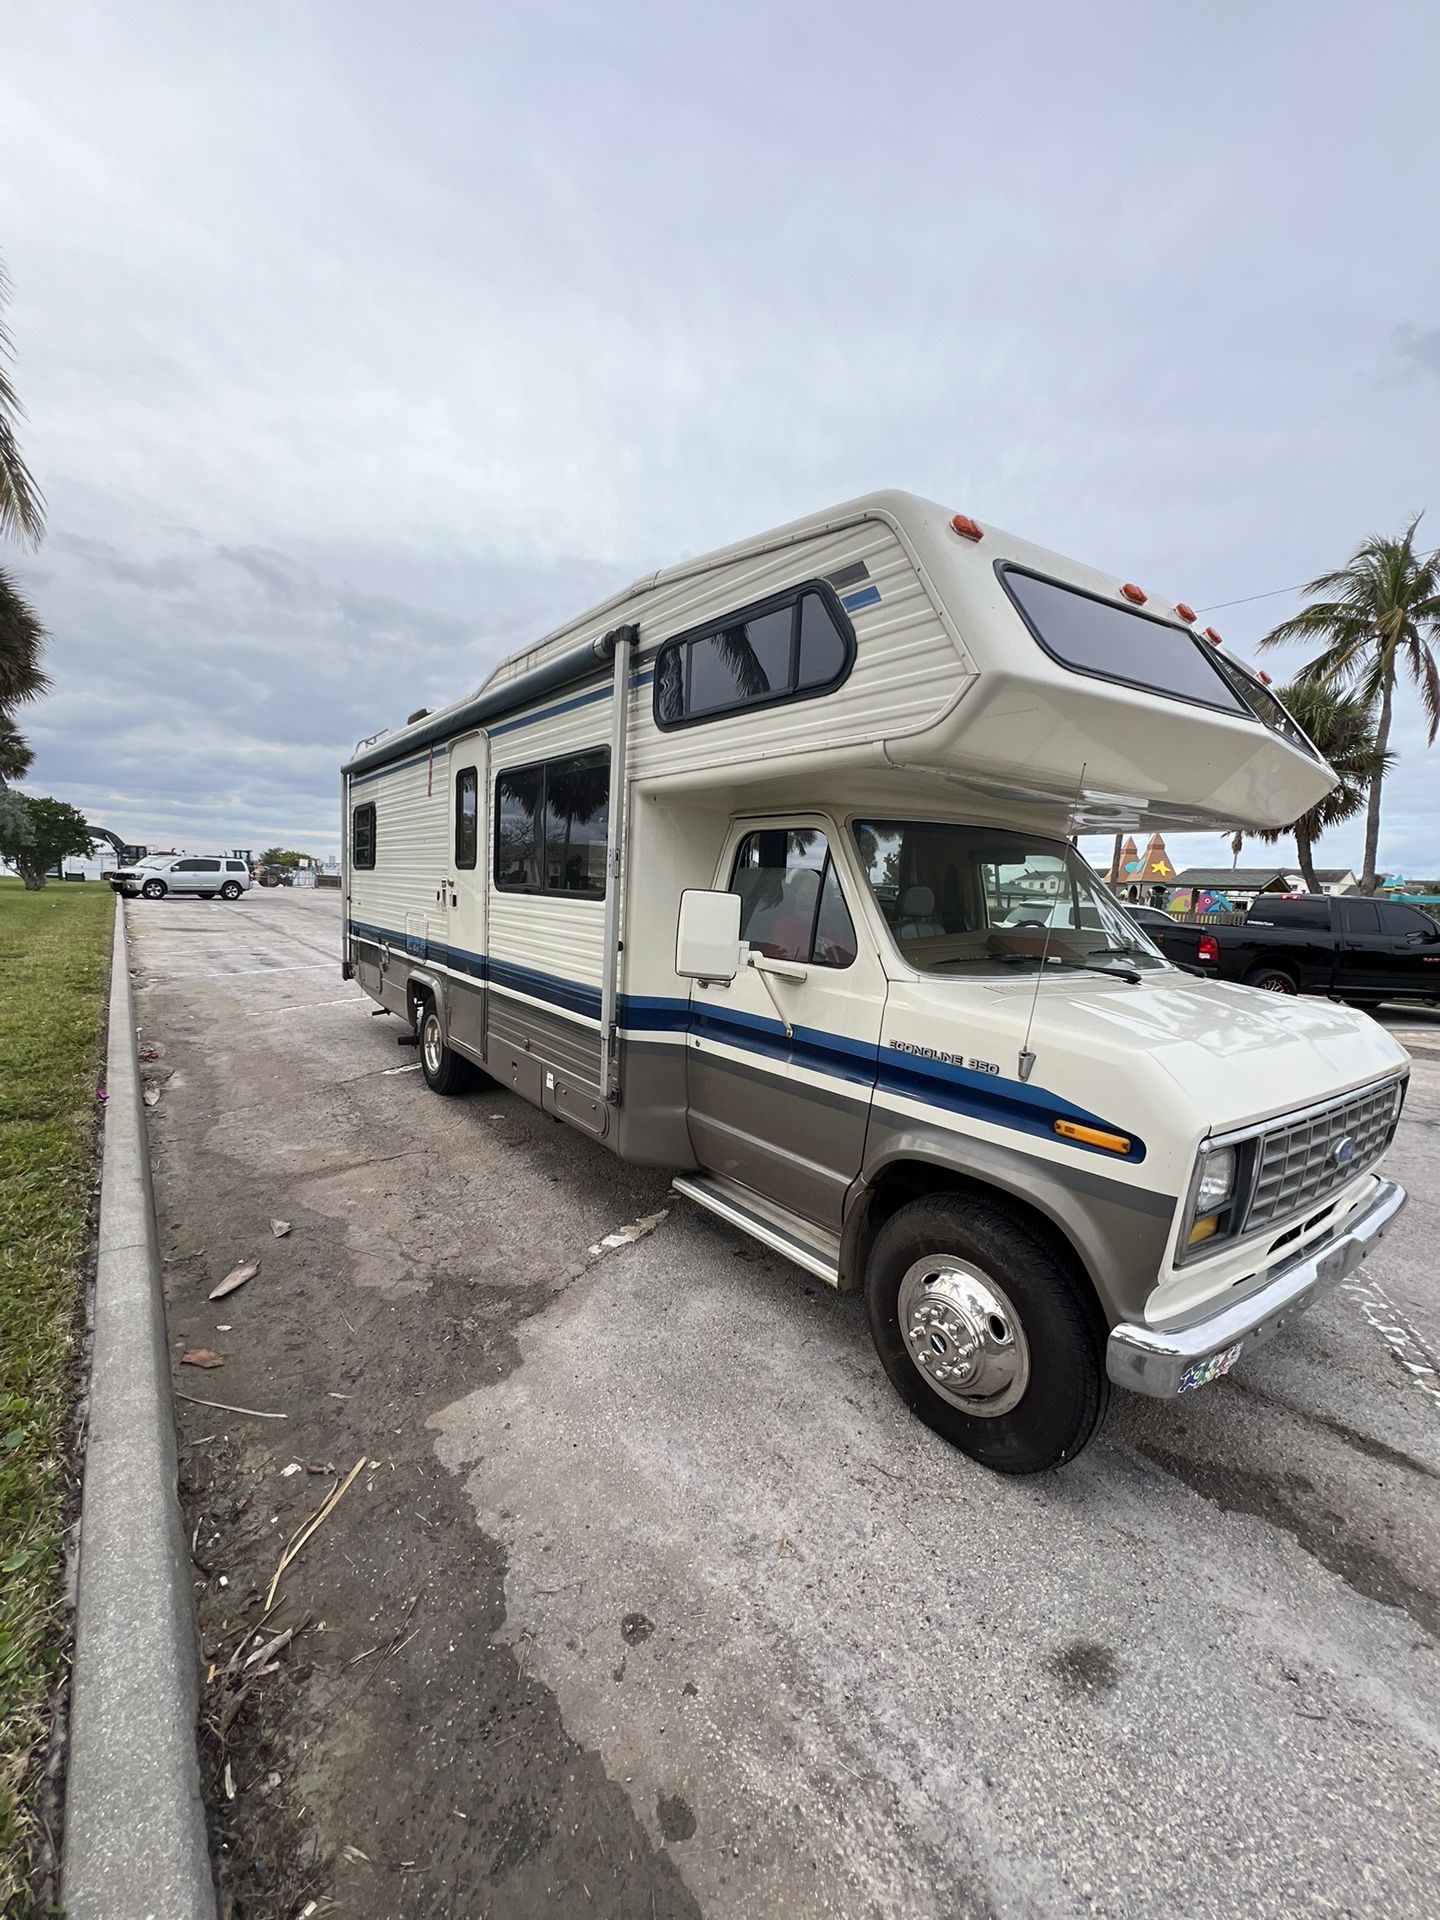 1989 RV For Sale  80,000 Miles  27’ Long